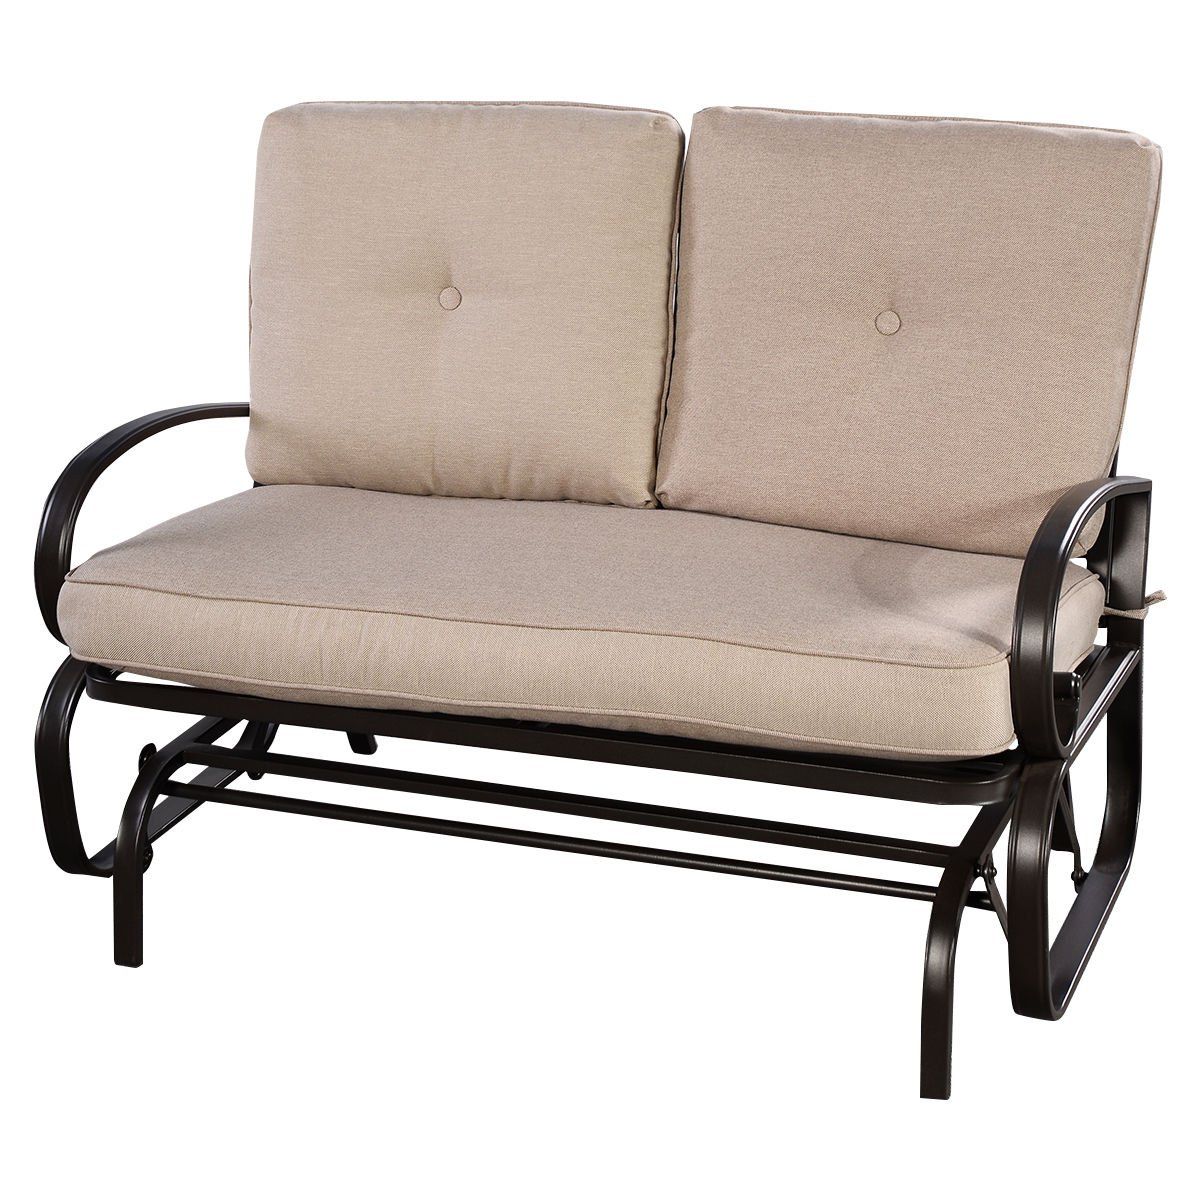 Rocking Glider Benches With Cushions Intended For Widely Used Amazon : Fdinspiration 47.5" Patio Steel Frame Glider (Photo 2 of 30)